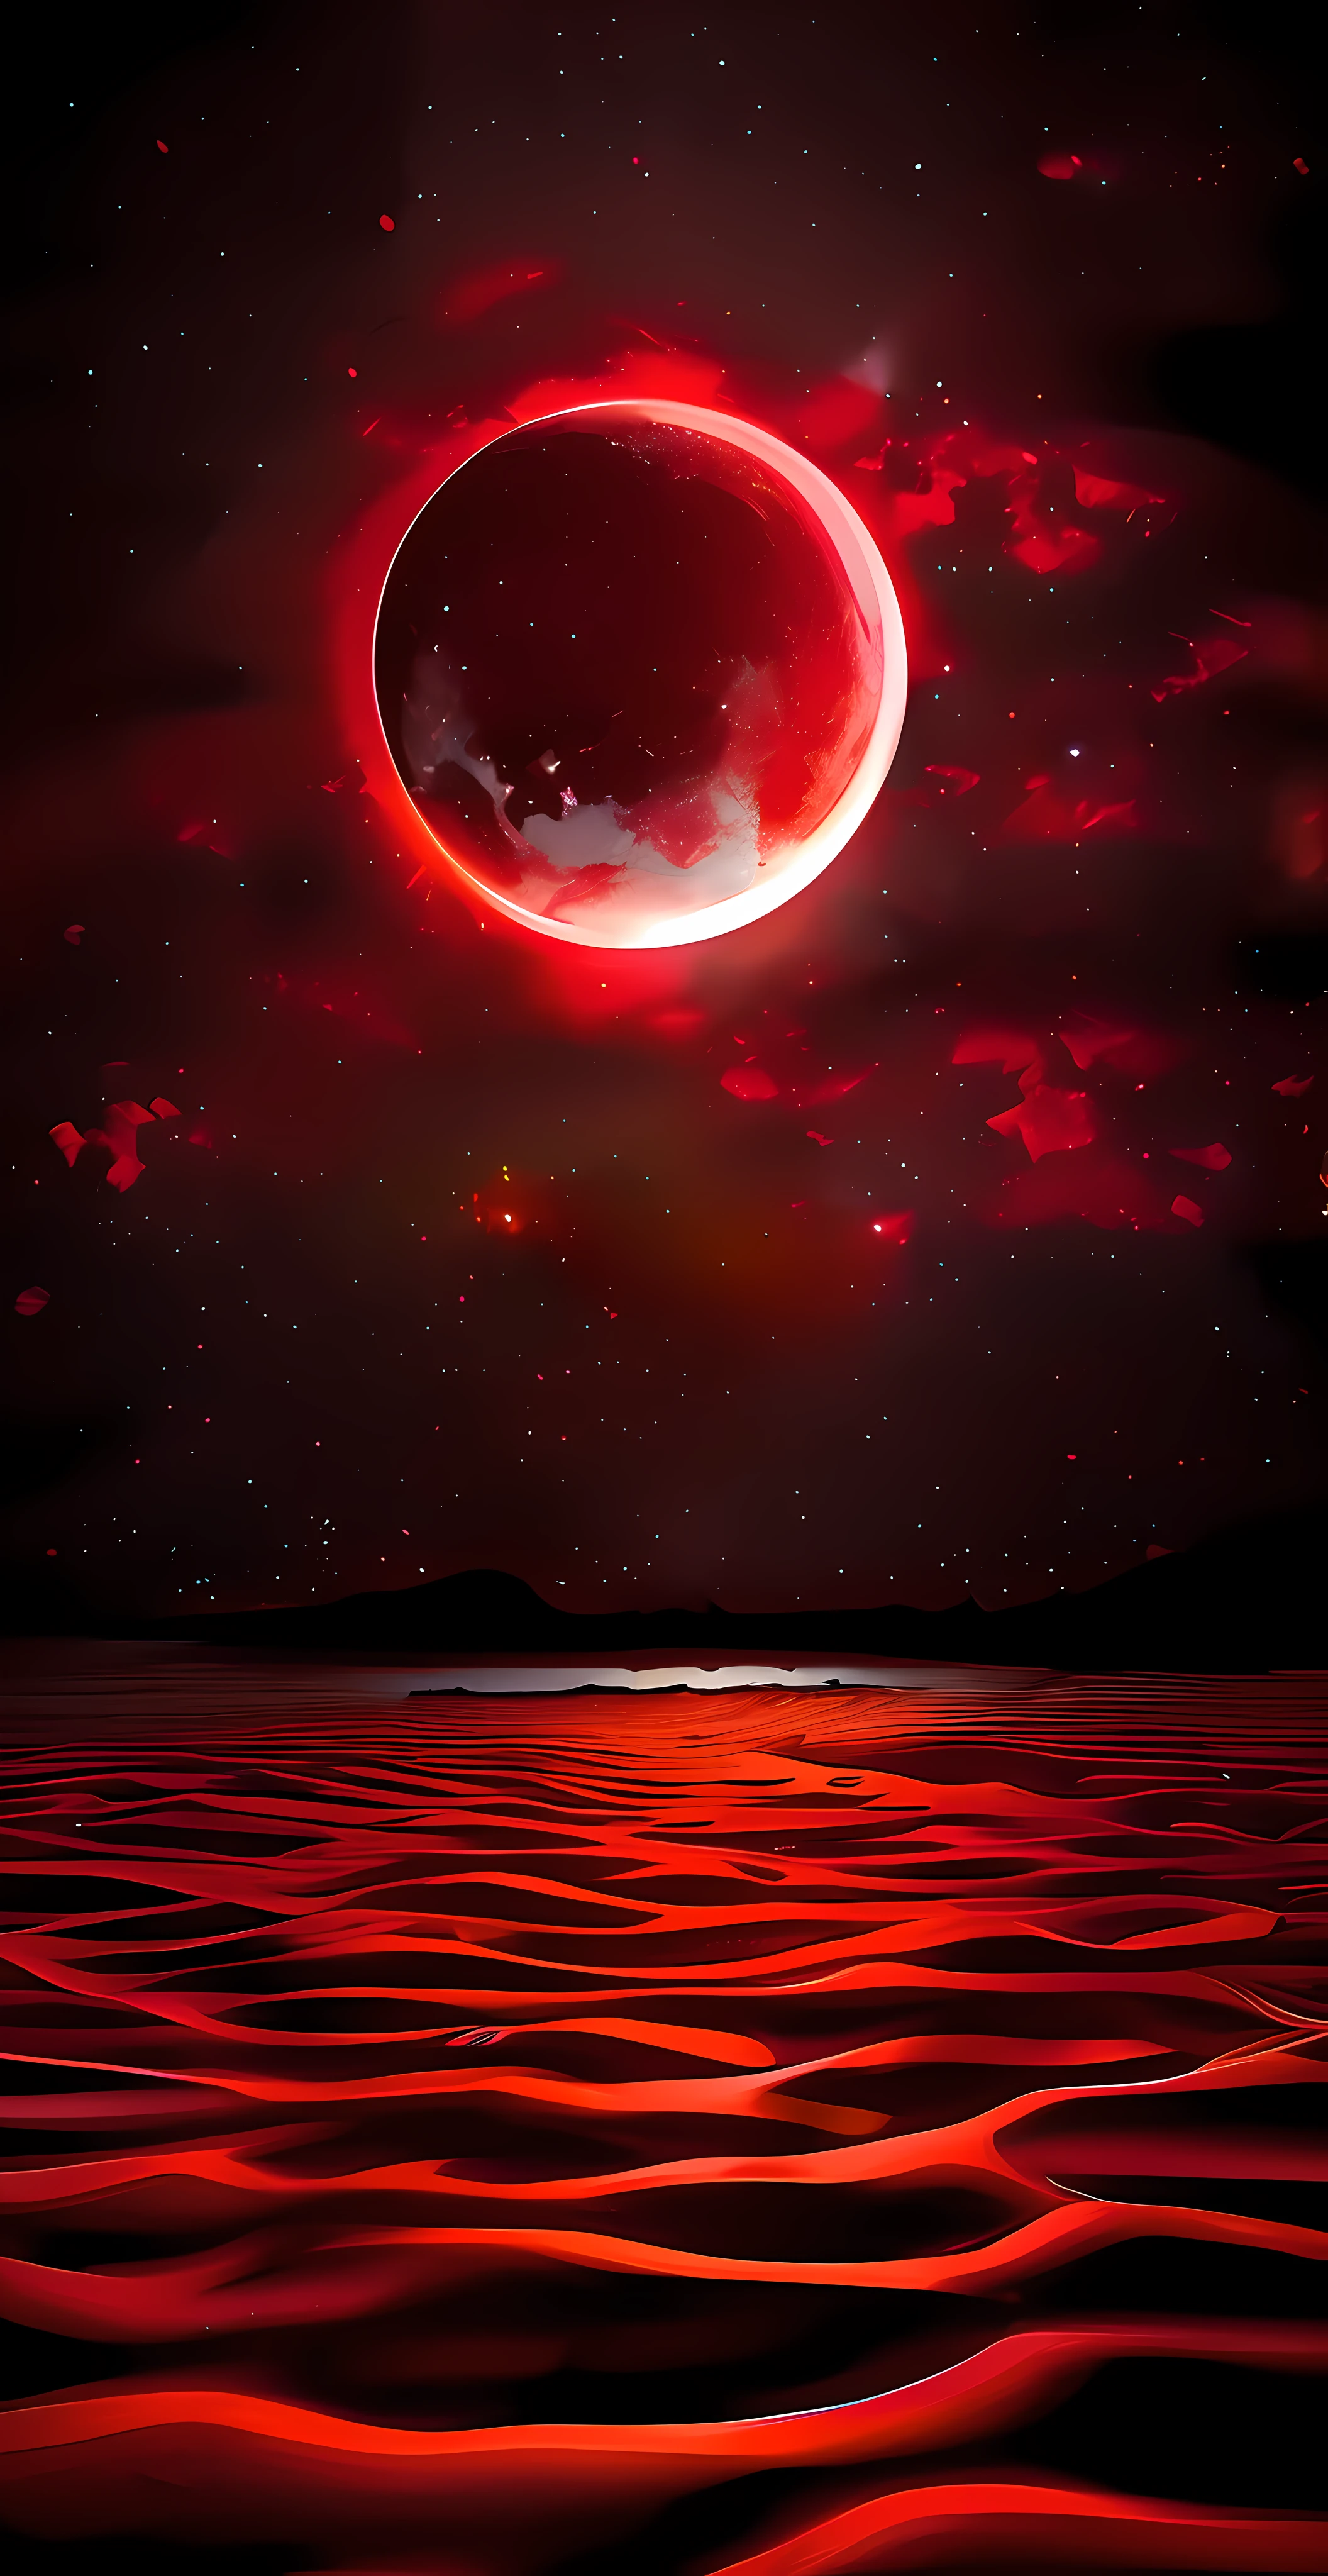 "Obra maestra surrealista. calidad excepcional. detalles sorprendentes. Surreal CG rendering of a dark red moon rising above a tranquil lake surrounded by red clouds, autoiluminado, Large area of clouds and fog in luminous tones, celestial lighting, Cosmic illumination, Experience the fusion of abstract and realistic elements. Colores vibrantes y contrastantes. Mysterious atmosphere. Surrealist technique in the representation of objects and figures. Organic textures and shapes. Dreamlike inspiration. Surprising composition and perspective. Adentrarse en un mundo surrealista lleno de sorpresas y emociones."